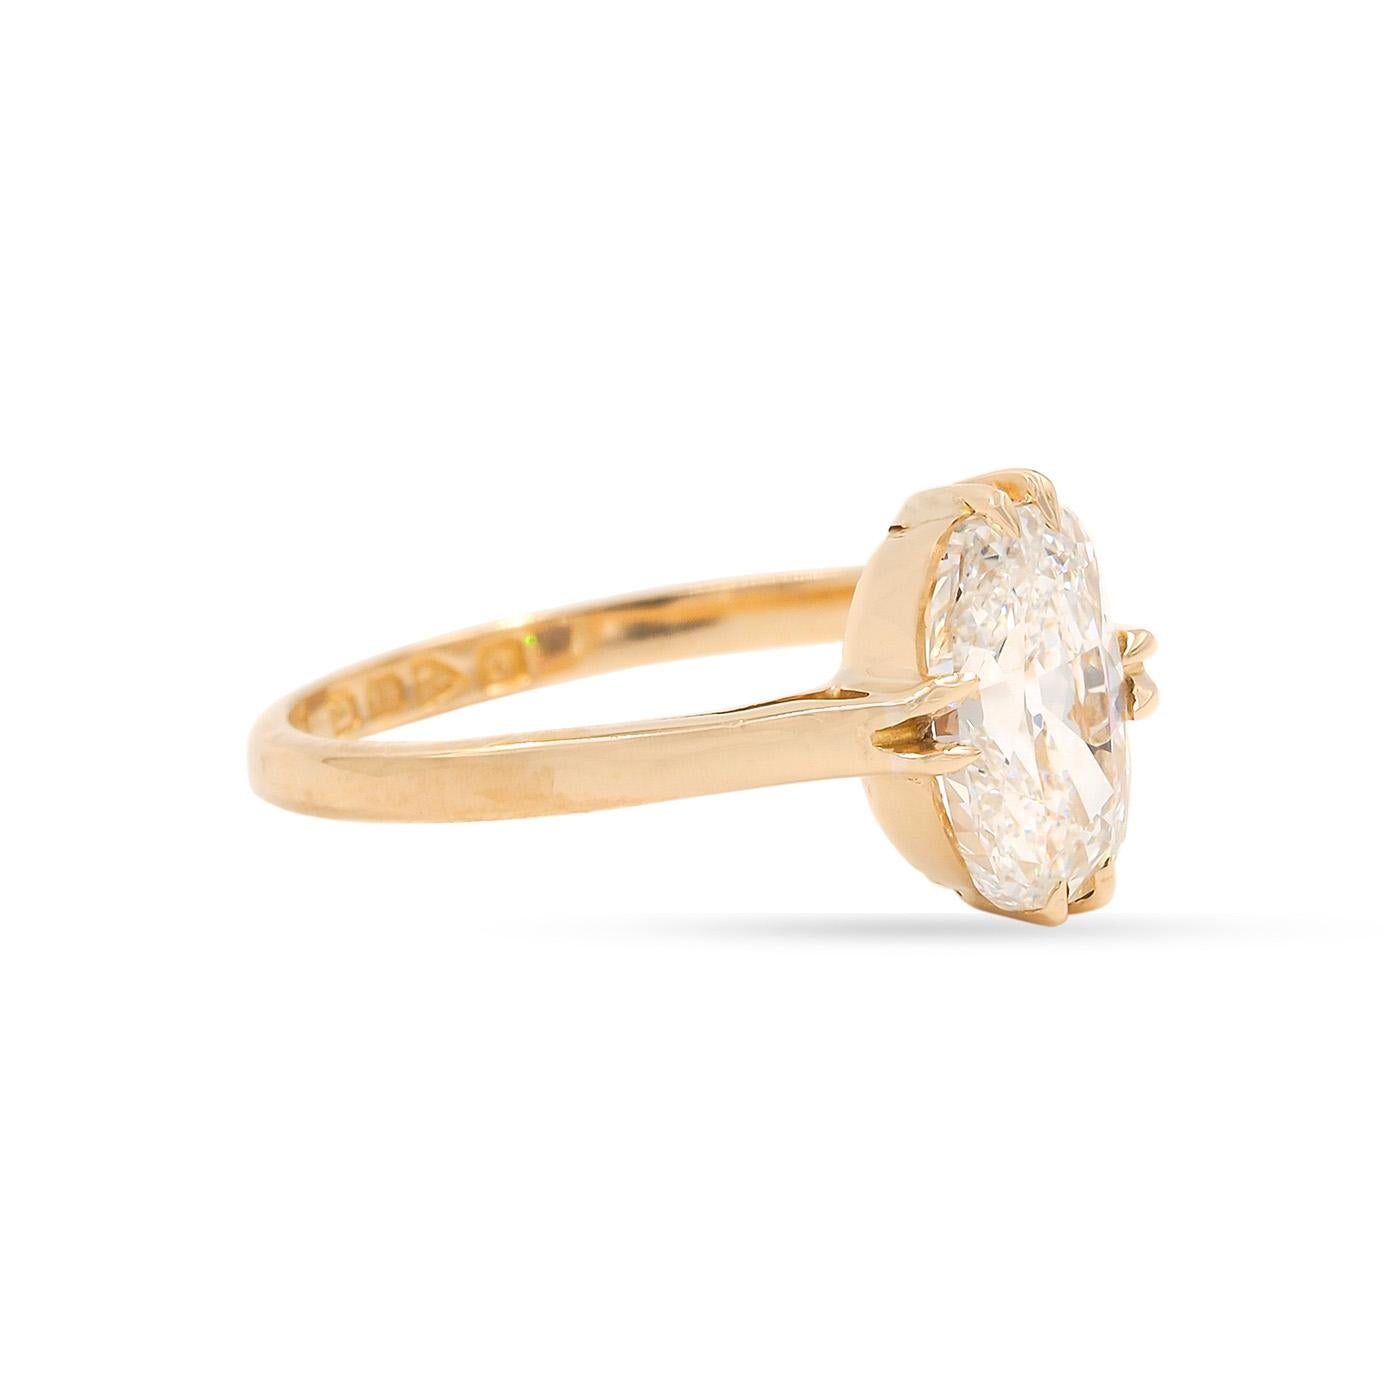 Edwardian era featuring a unique 1.52 Carat Elongated Old Mine Cushion Cut Diamond. Composed of 18k yellow gold. The diamond is GIA certified G color & VVS2 clarity. With double claw prongs at the top and sides of the diamond. English origin,